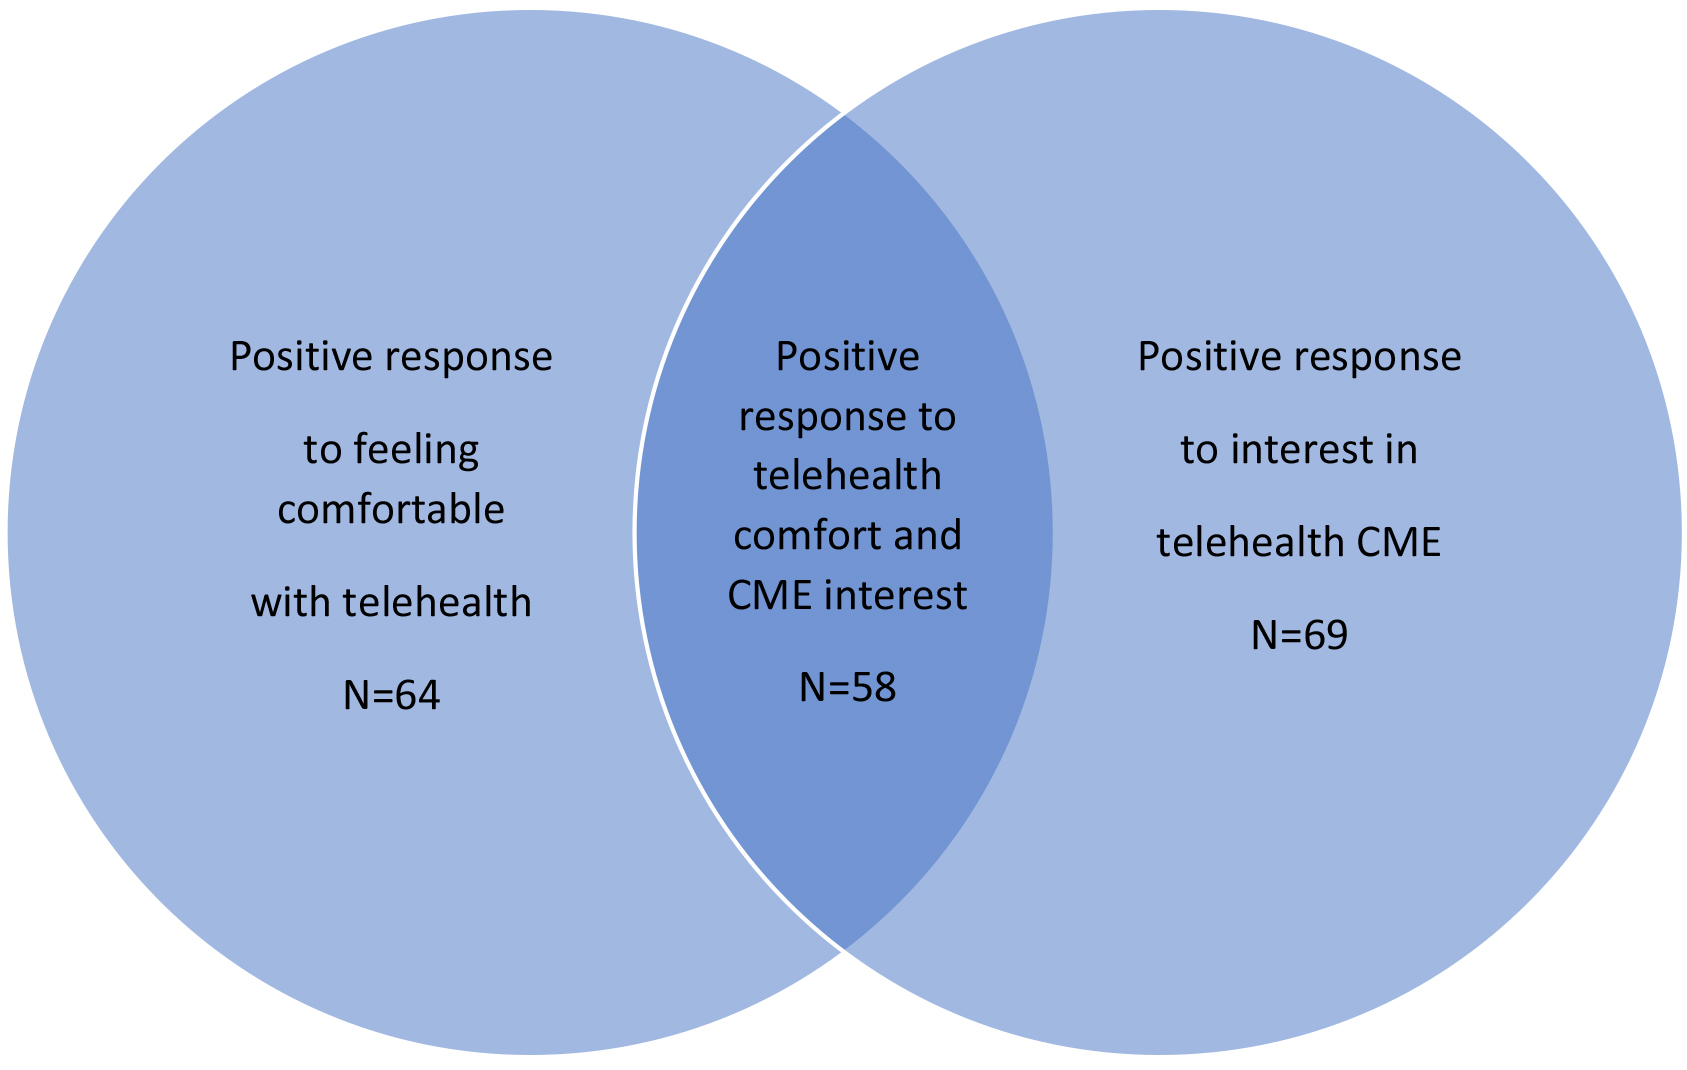 Telehealth comfort and interest in continuing medical education. This figure shows the overlapping comfort with performing visits via telehealth and interest in telehealth CME.